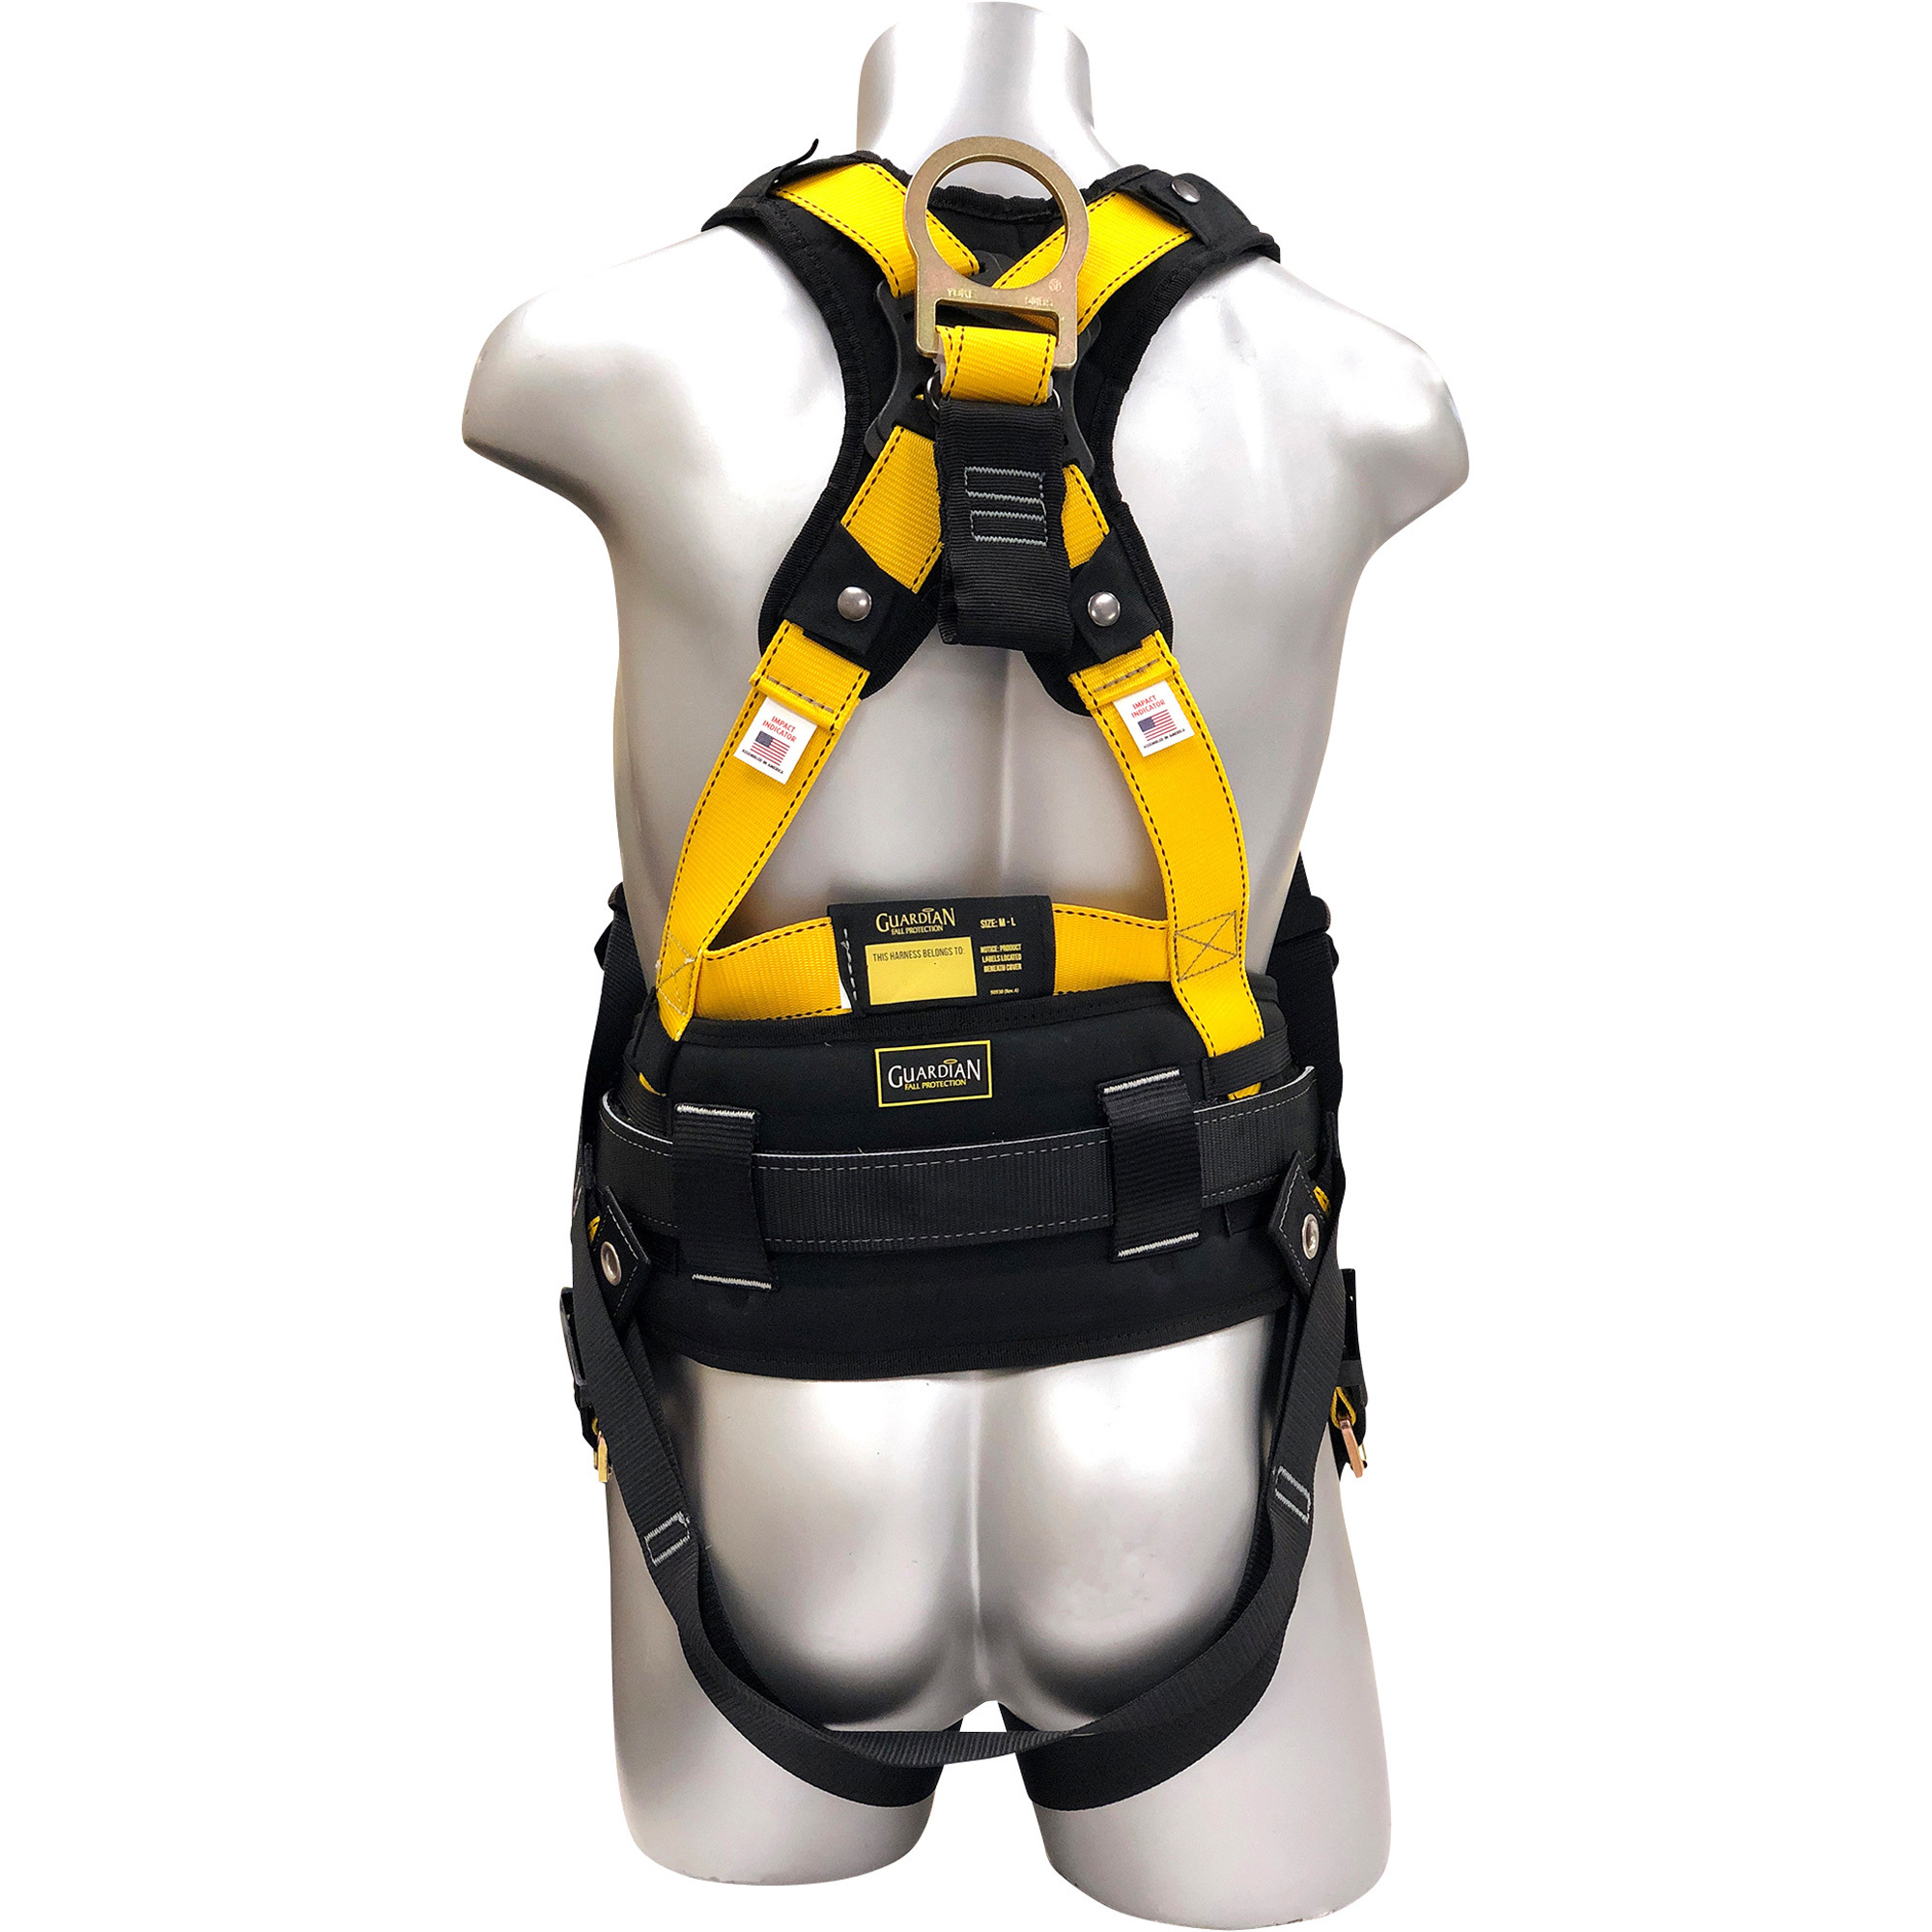 Guardian Fall Protection Series 3 Full Body Safety Harness with Waist Pad, XL/XXL, Model 37194S